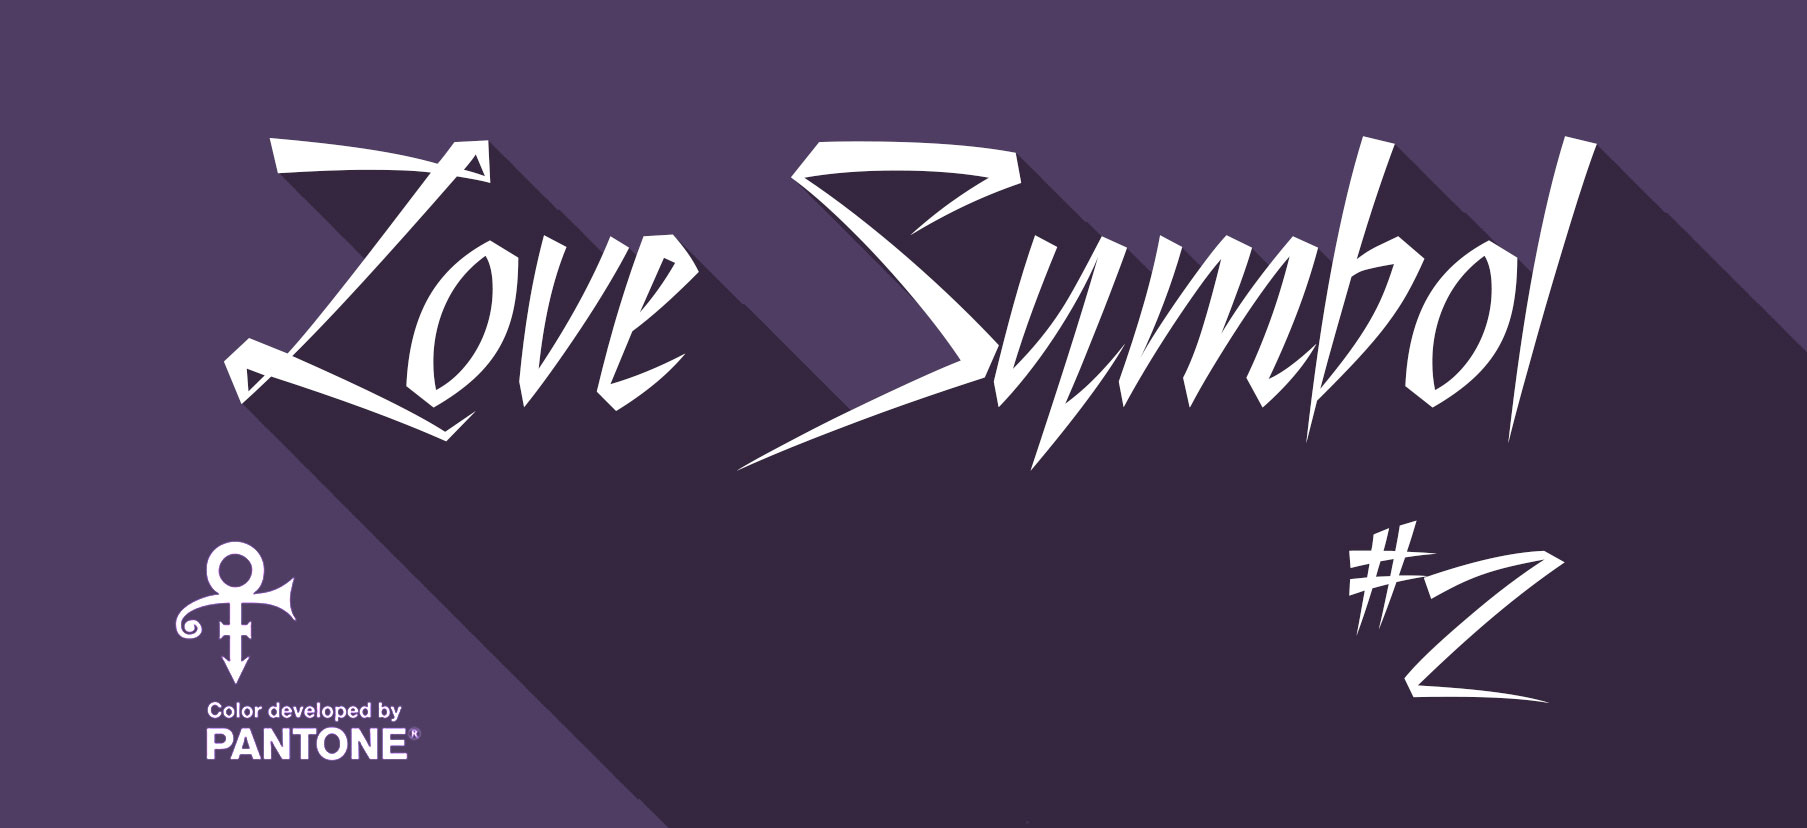 The new Prince colour purple created by Pantone, called love symbol #2